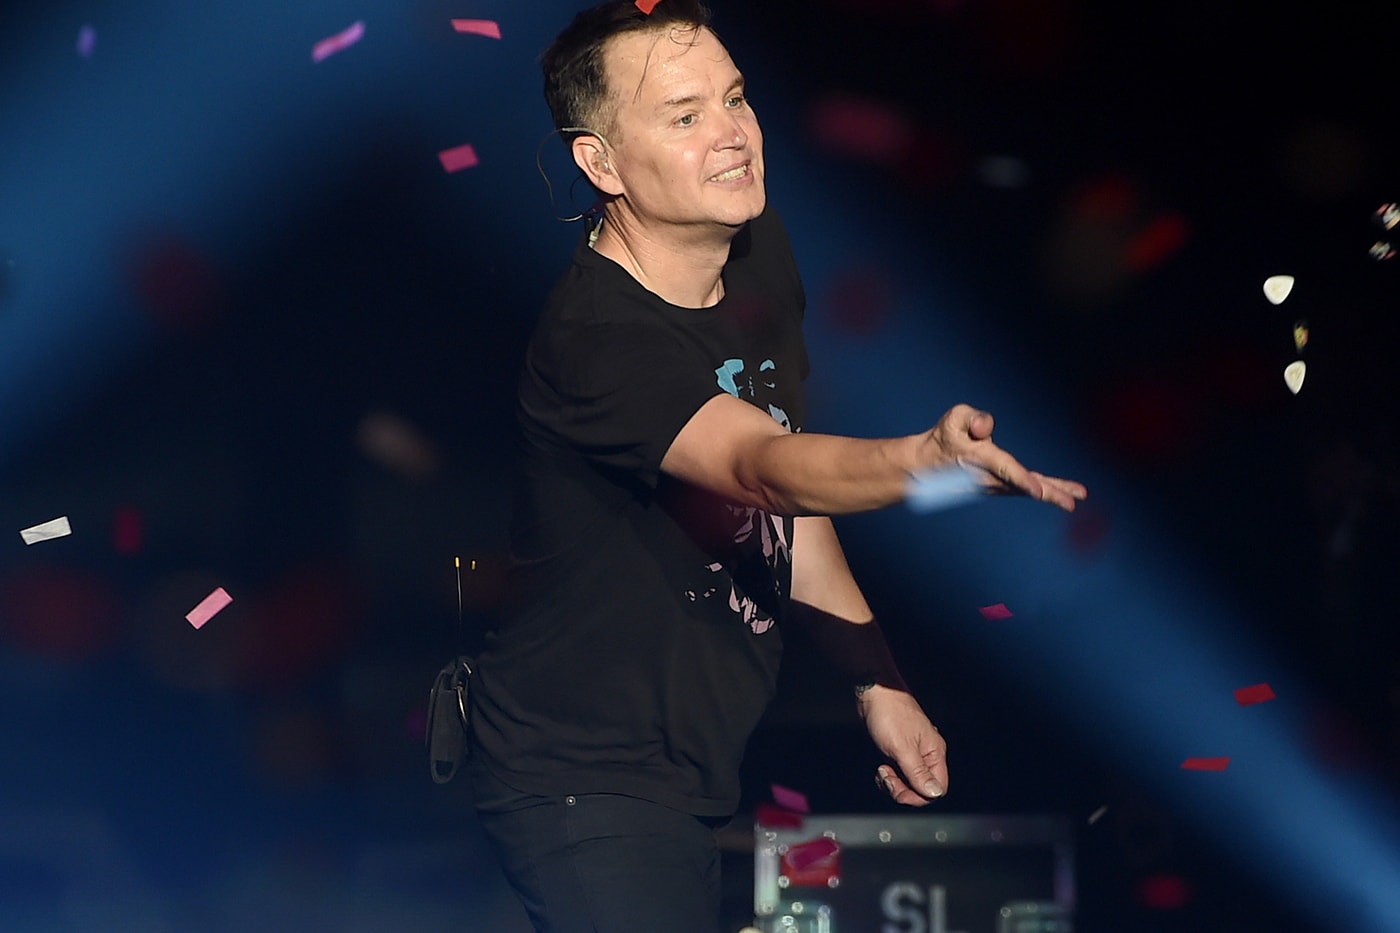 Mark Hoppus Reveals Cancer Diagnosis chemotherapy treatment blink 182 